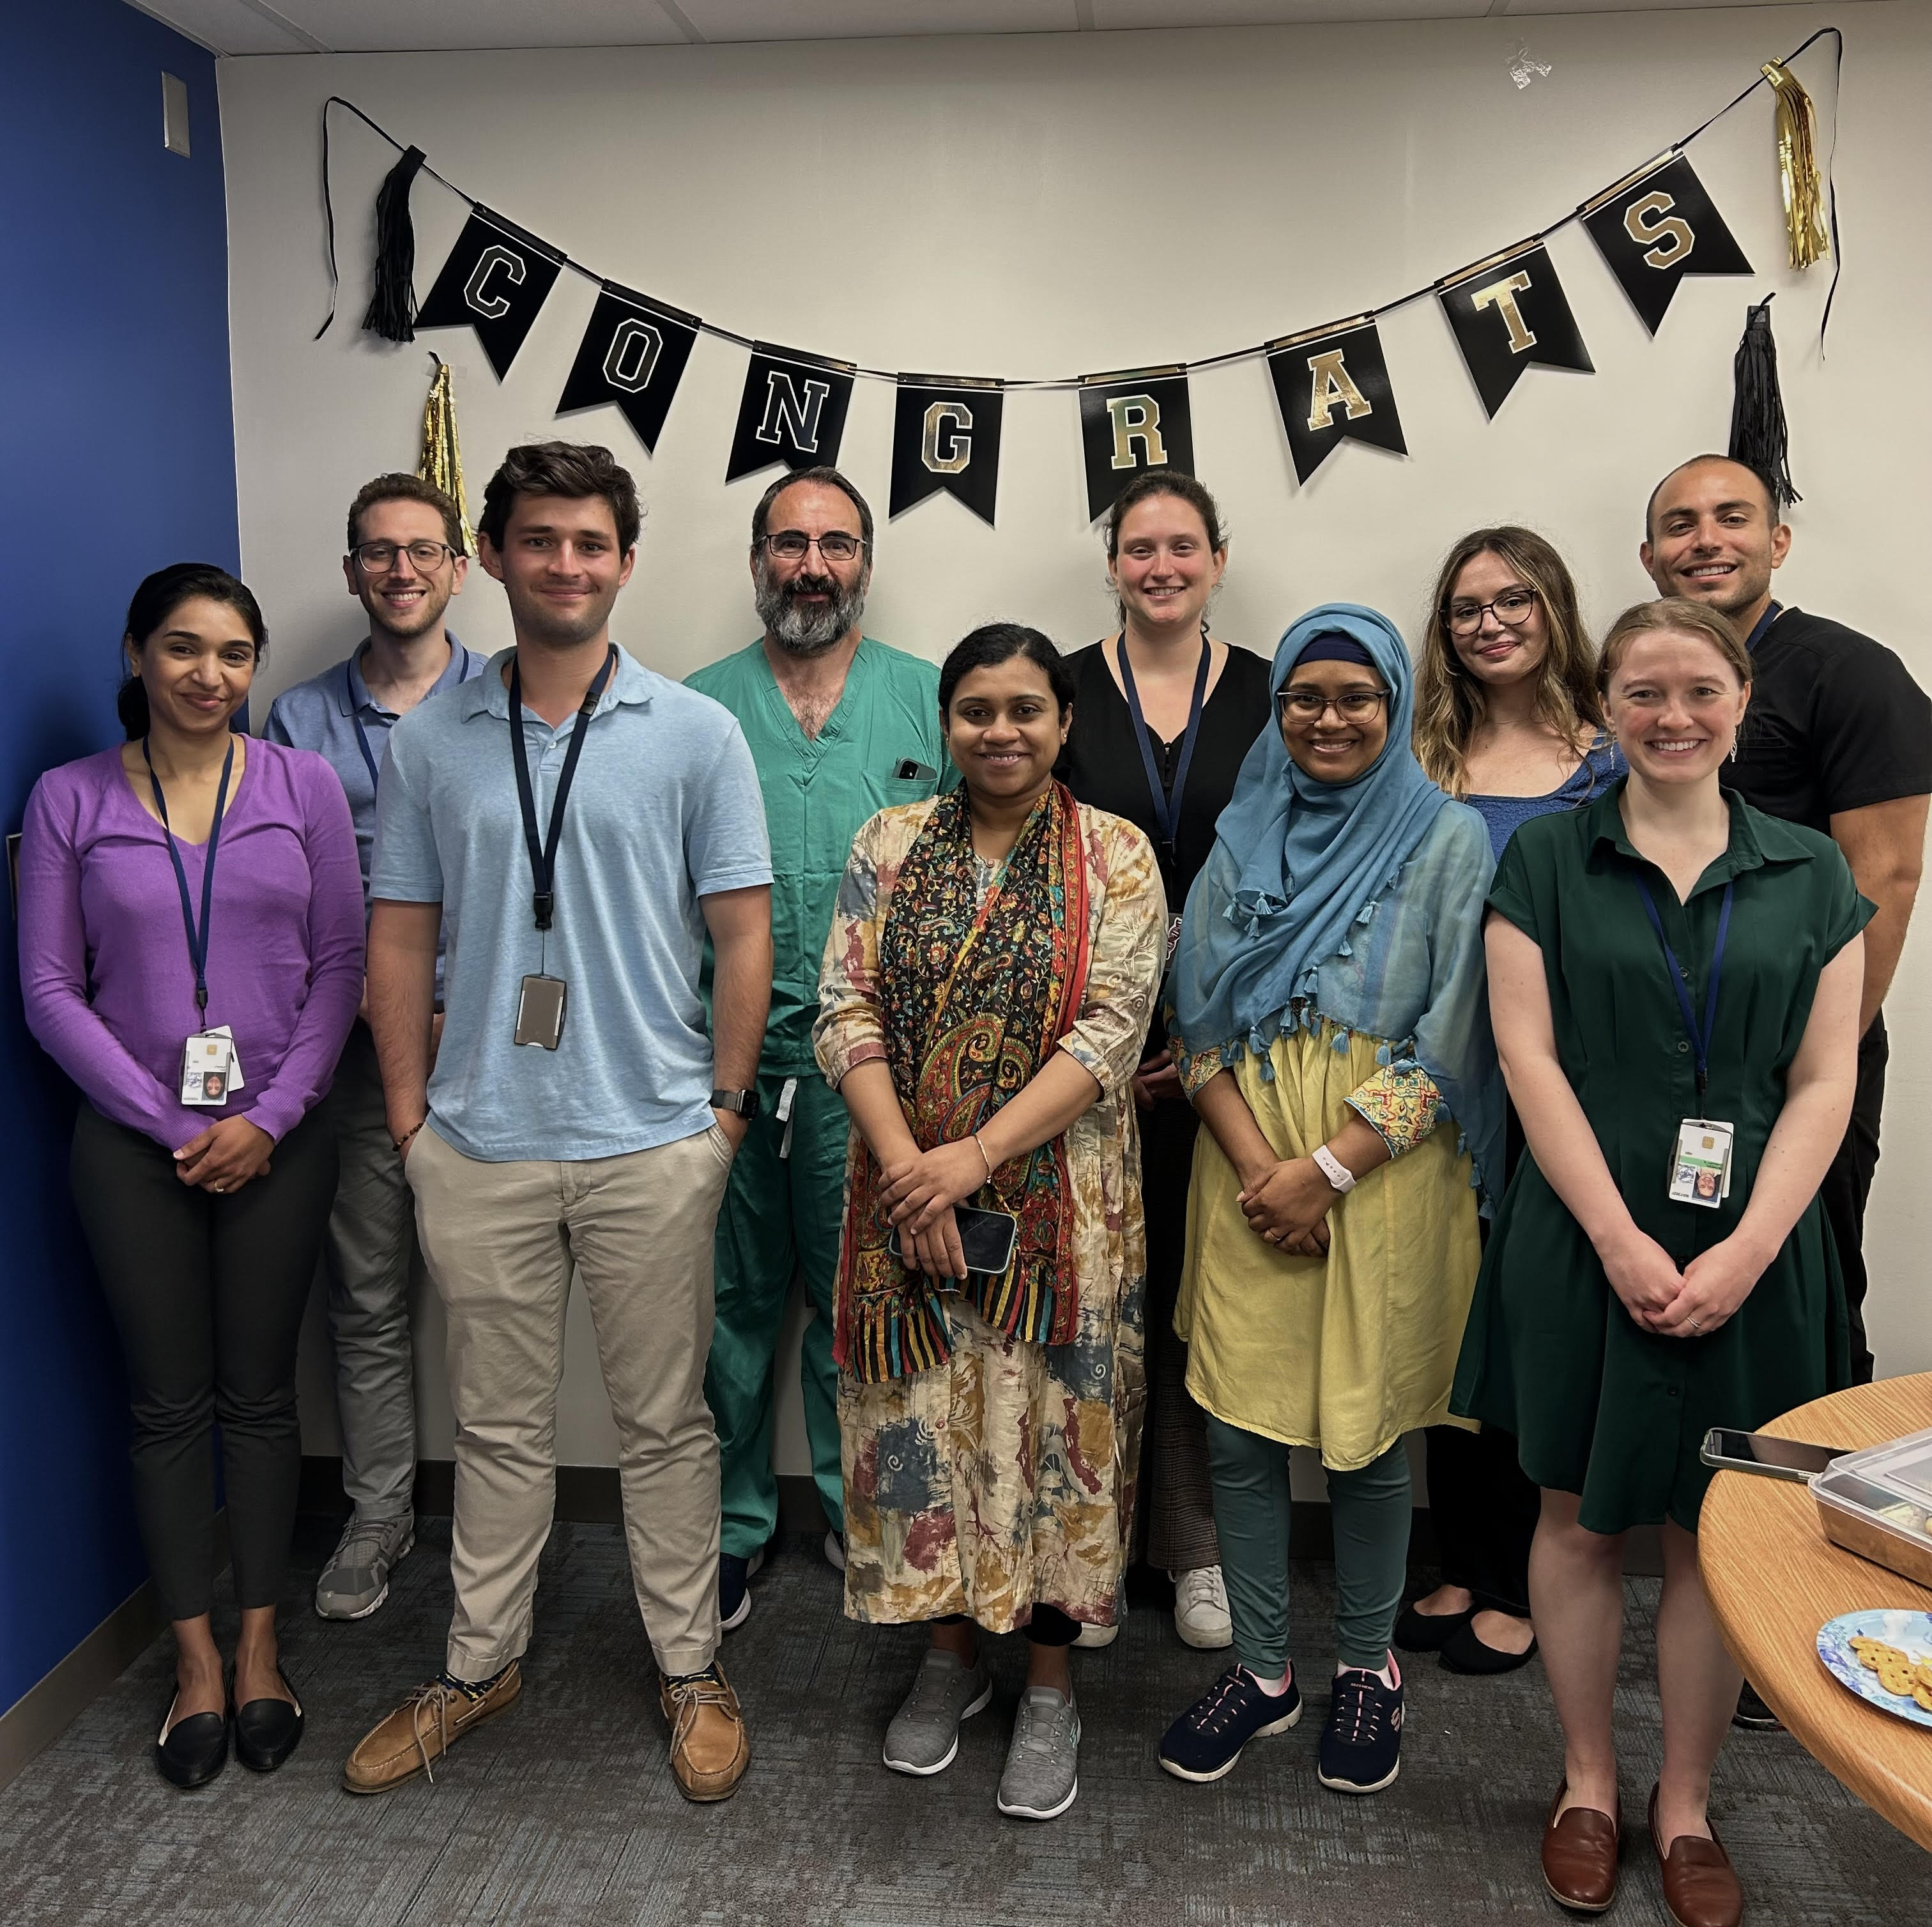 Lab Members in front of a banner that says "Congrats"